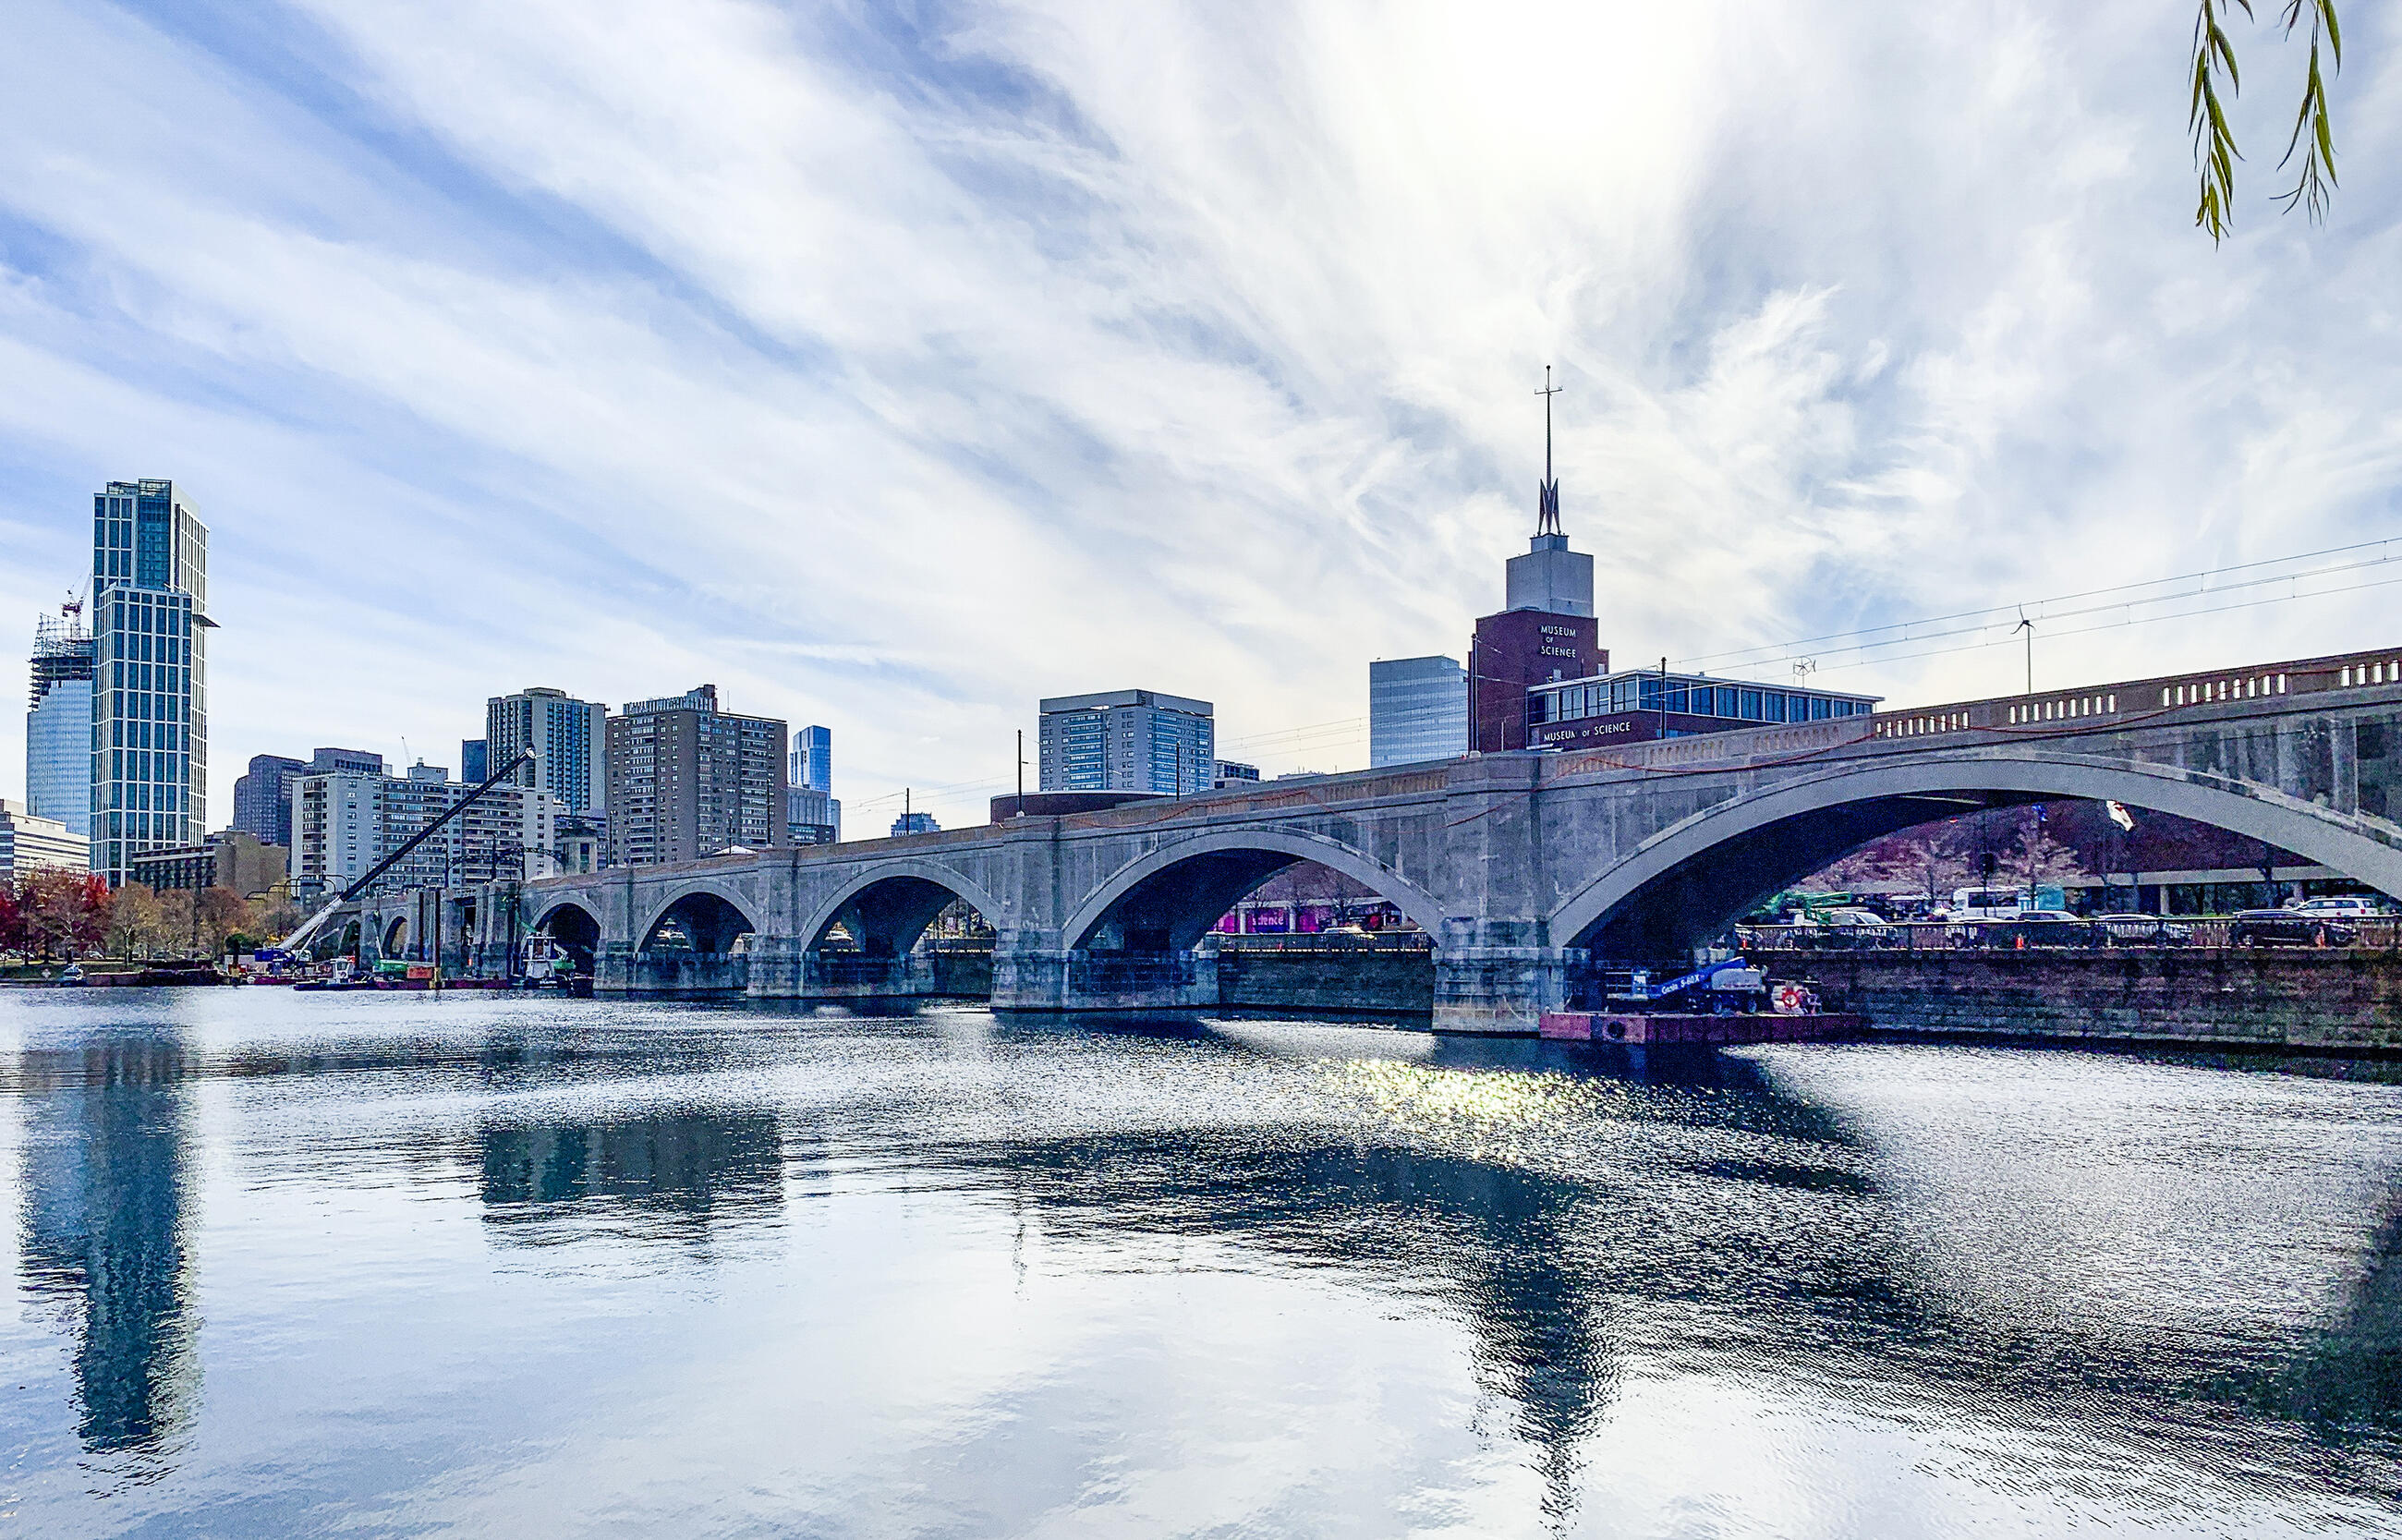 The 110-year-old viaduct stretches across the Charles River connecting Boston and Cambridge.